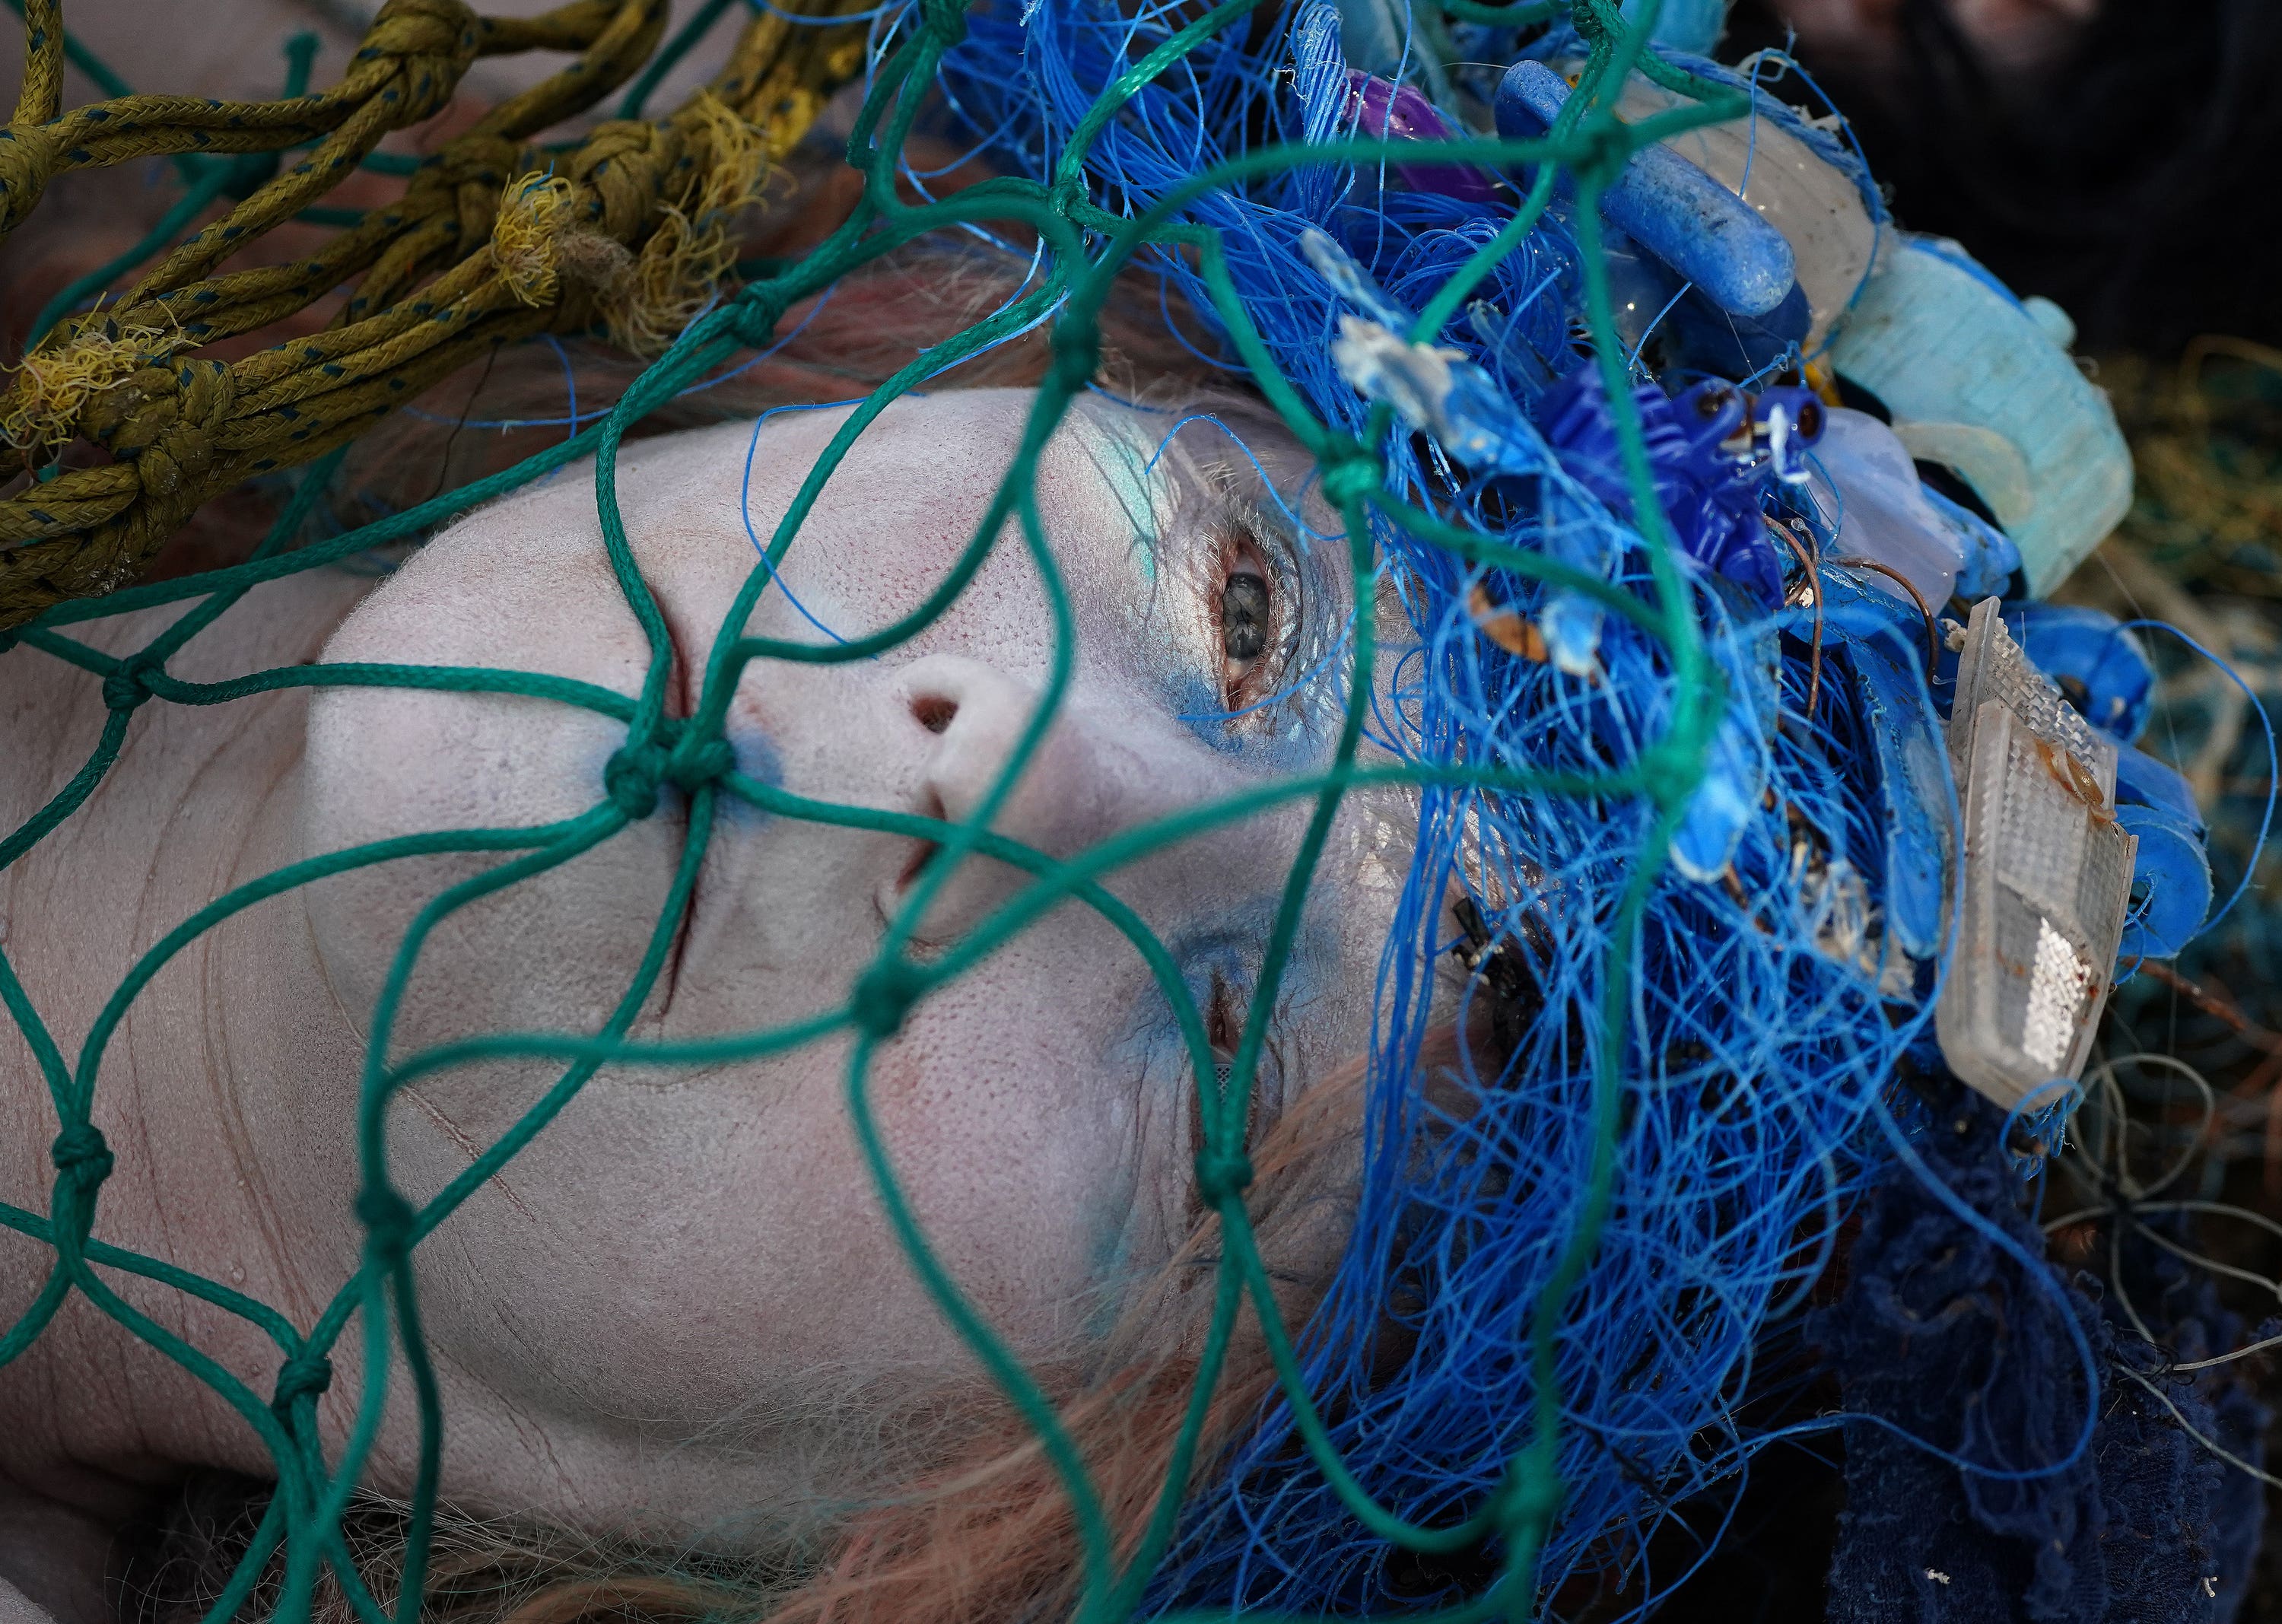 Earlier, activists from Ocean Rebellion staged a ‘dead merpeoples’ stunt opposite the COP26 venue, with activists lying still entangled in netting and litter.